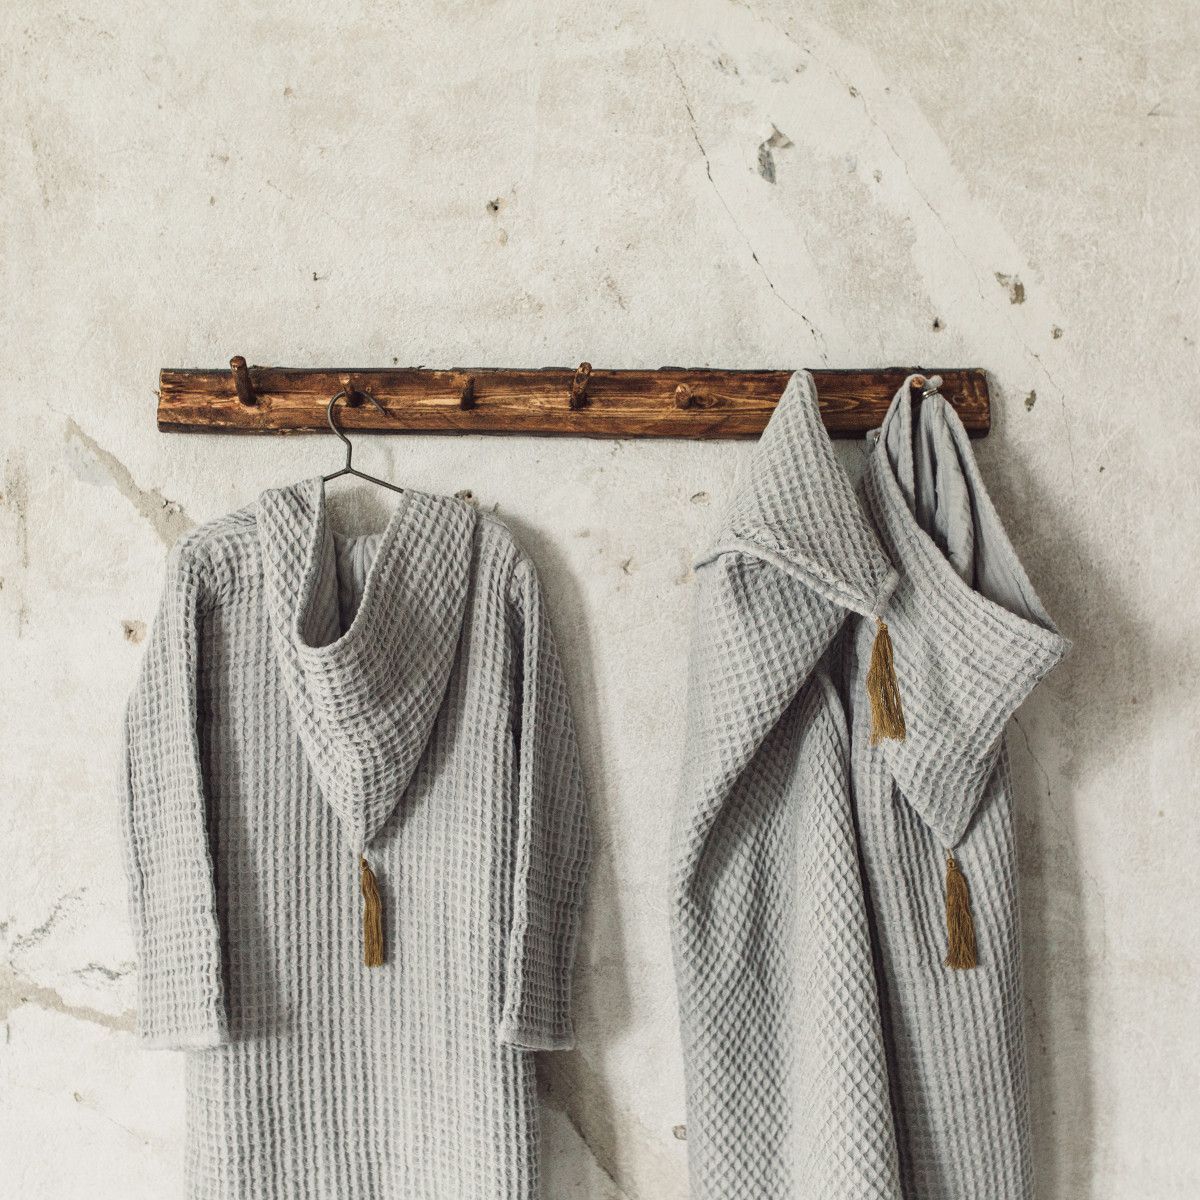 Towels, bathrobes and ponchos - which ones will steal your heart?